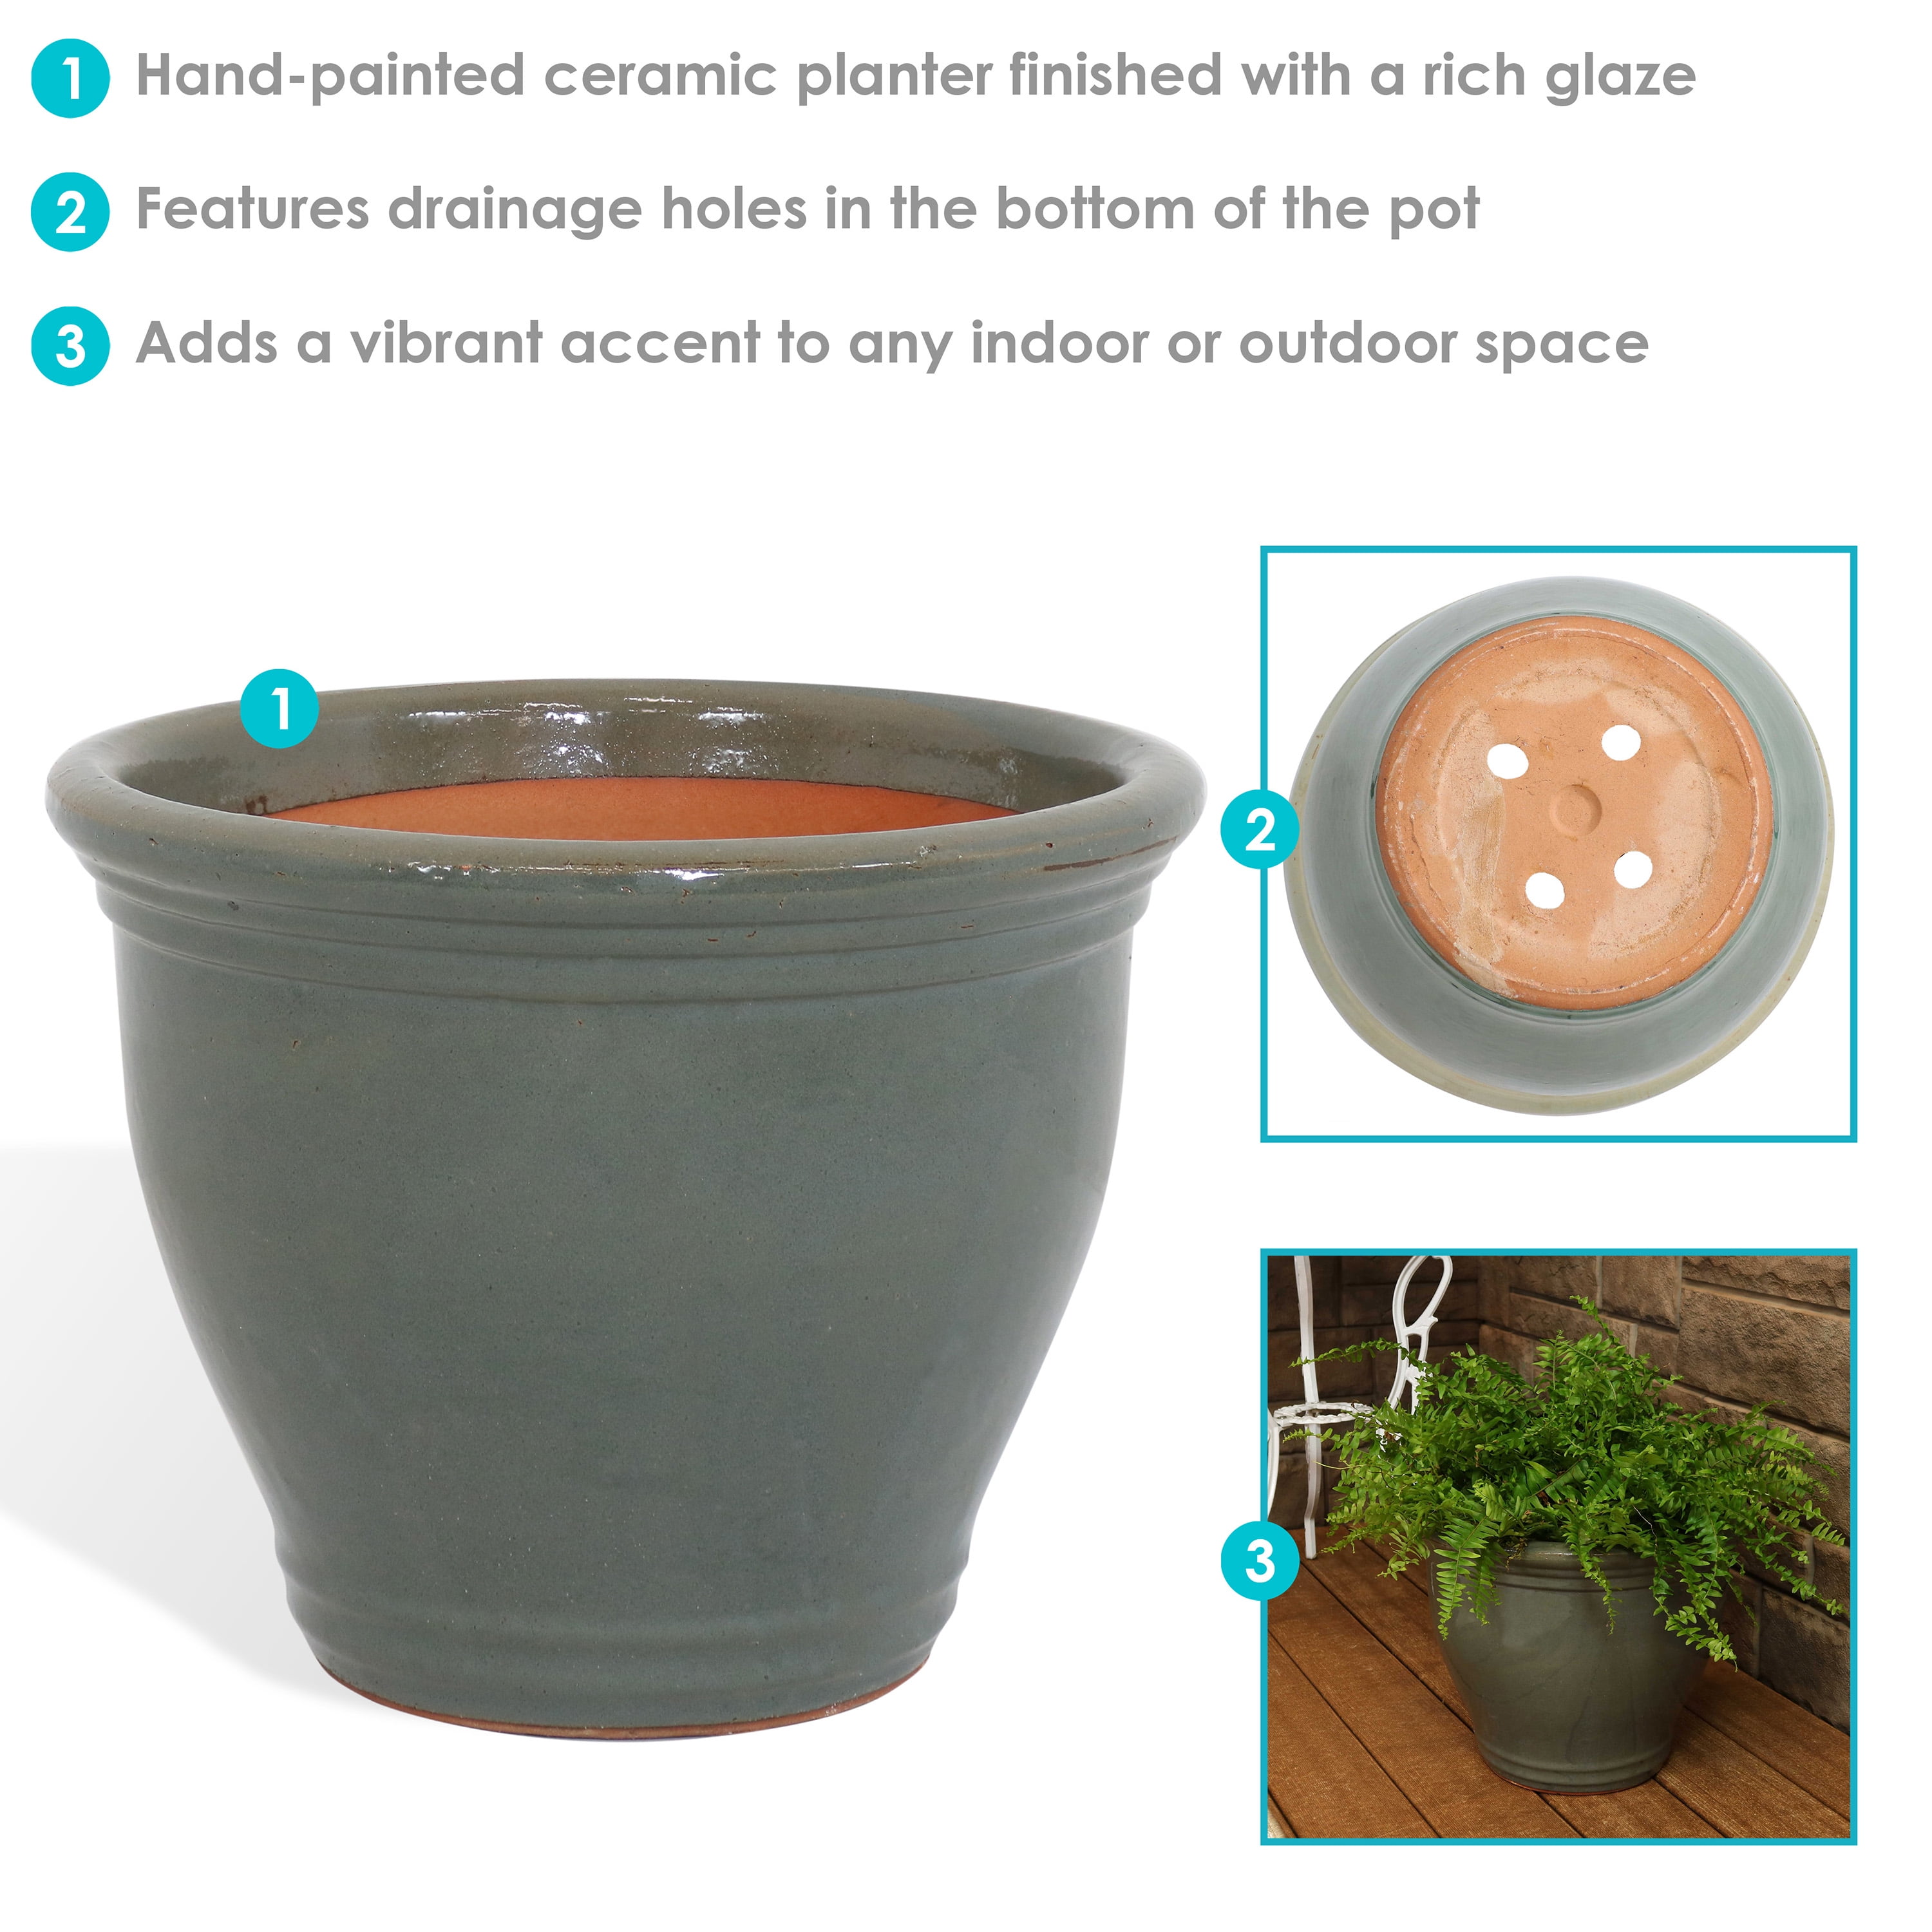 what is a good glossy glaze to use for this clay? to make it food safe/  plant safe(might make some plant pots or plates or something idk) : r/clay